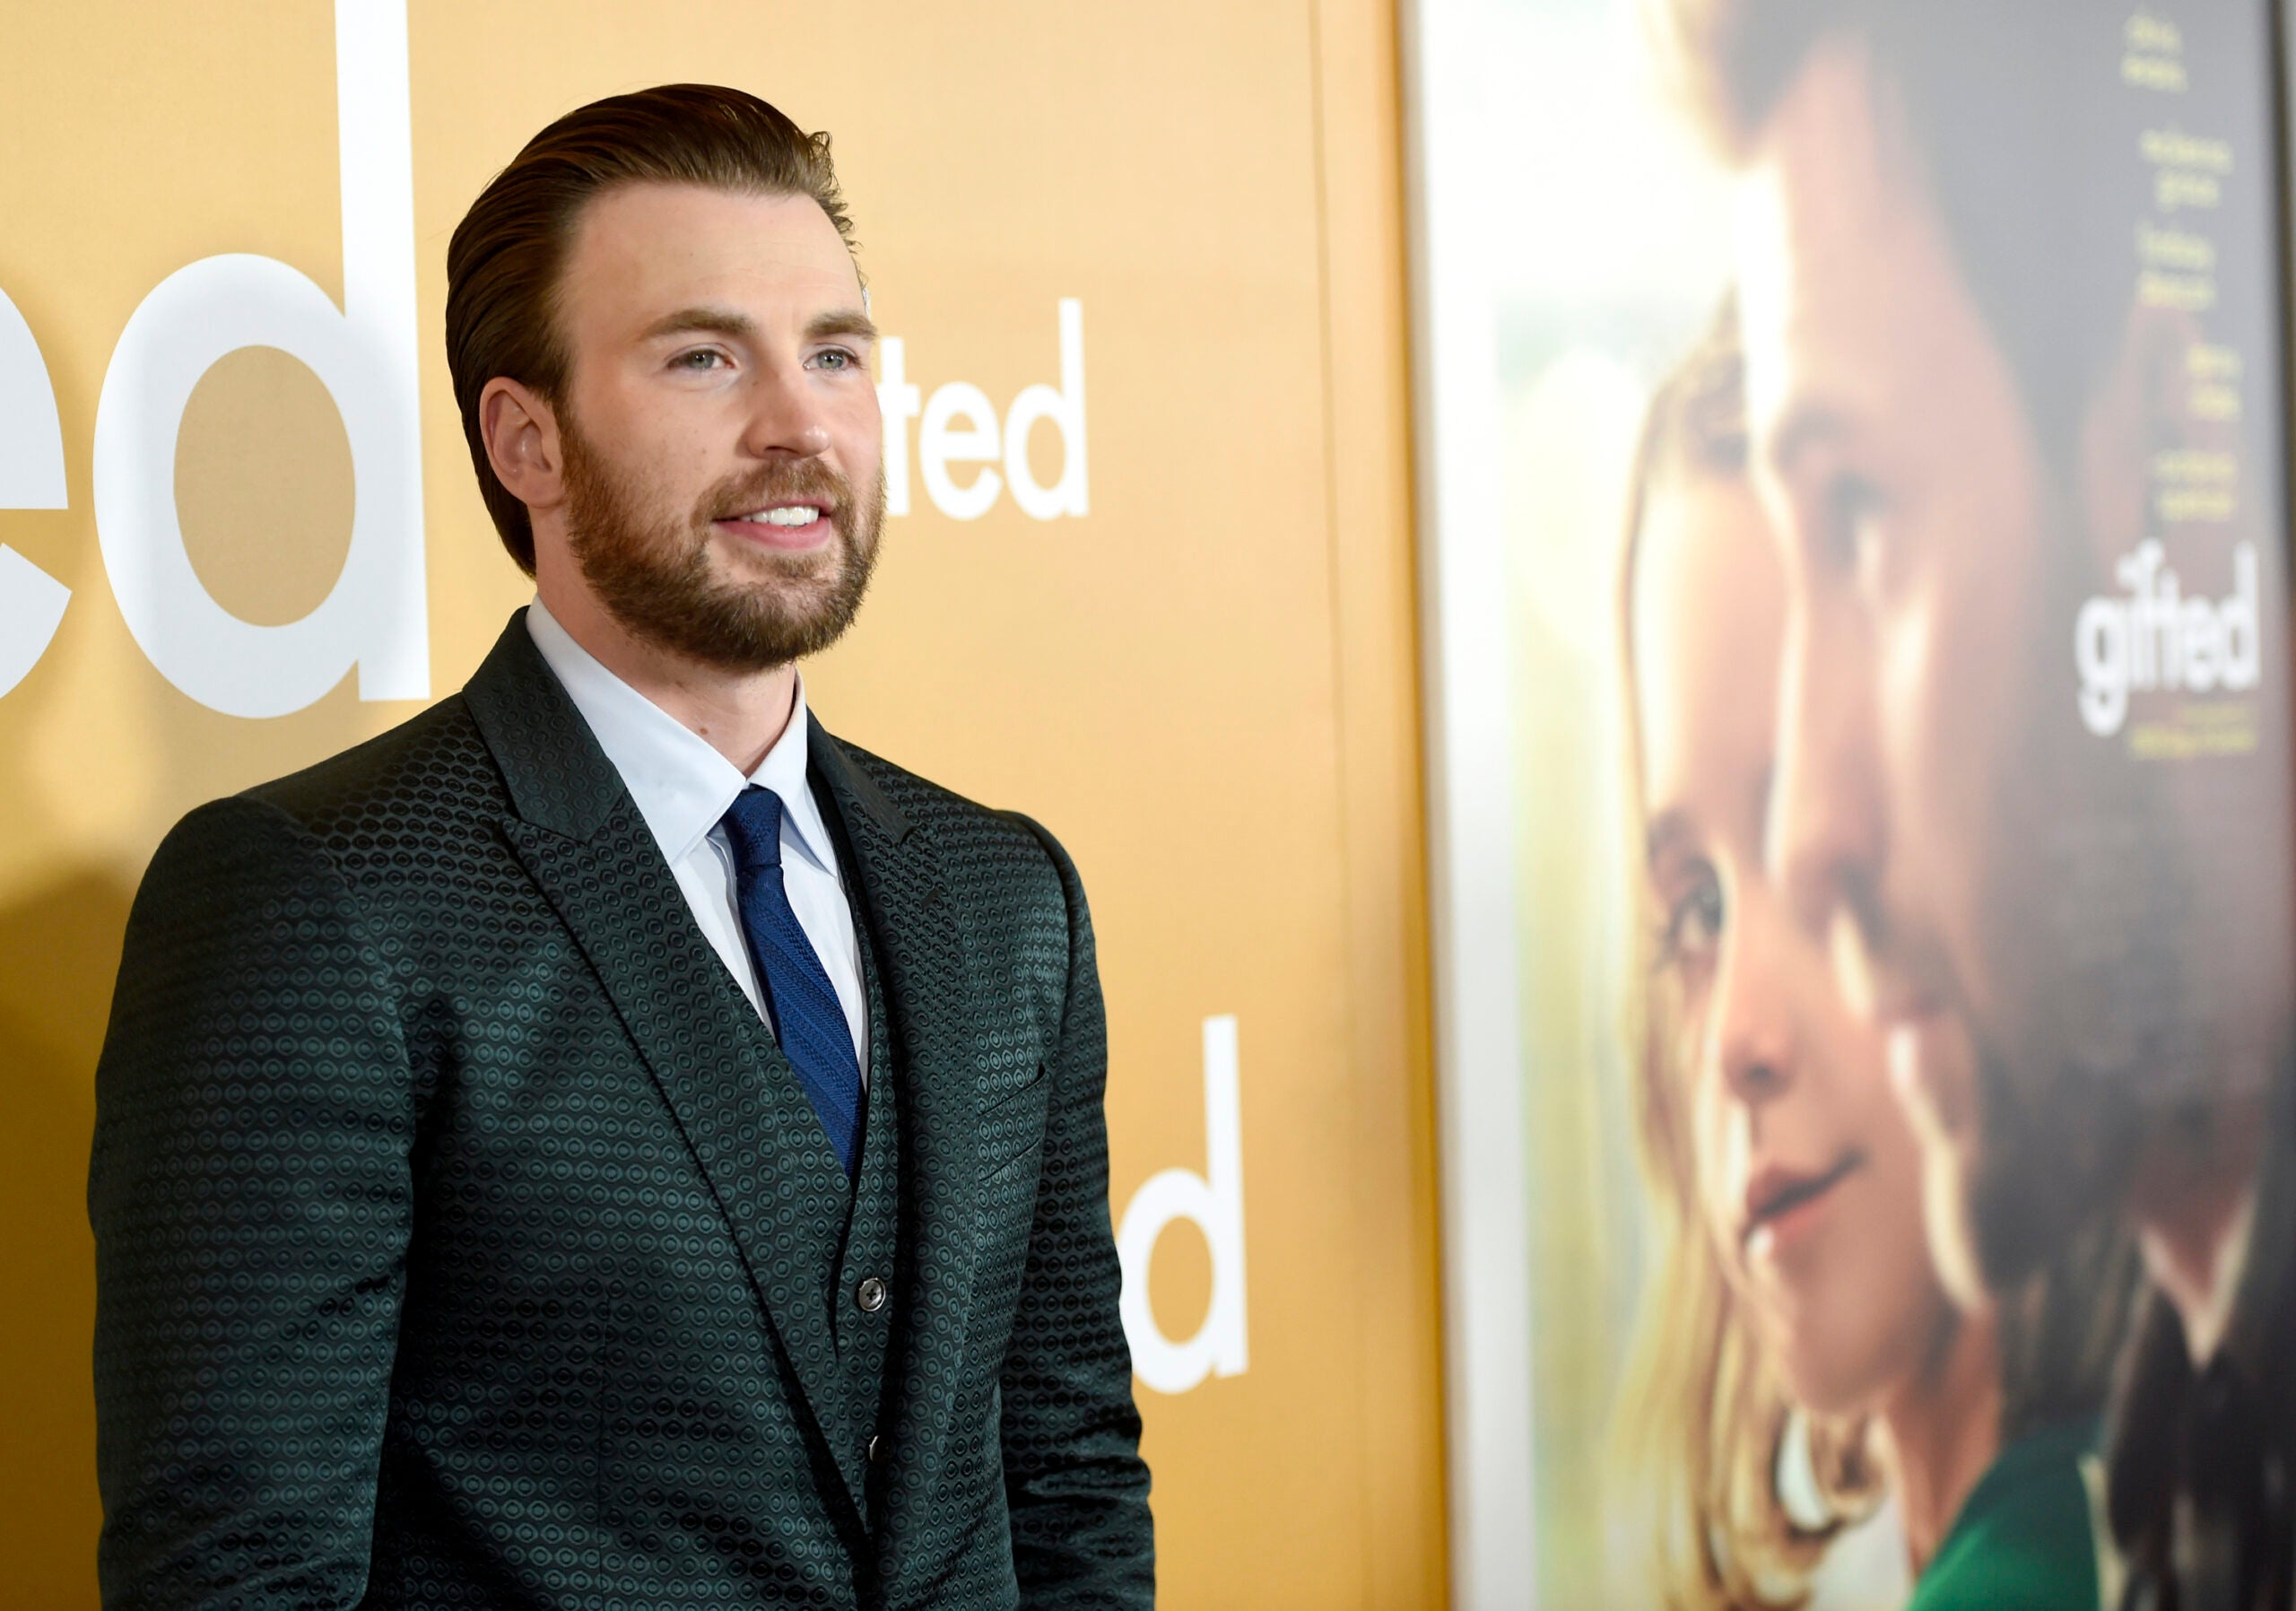 Marc Webb's 'Gifted' Starring Chris Evans, Jenny Slate & Octavia Spencer  Doesn't Quite Add Up [Review]